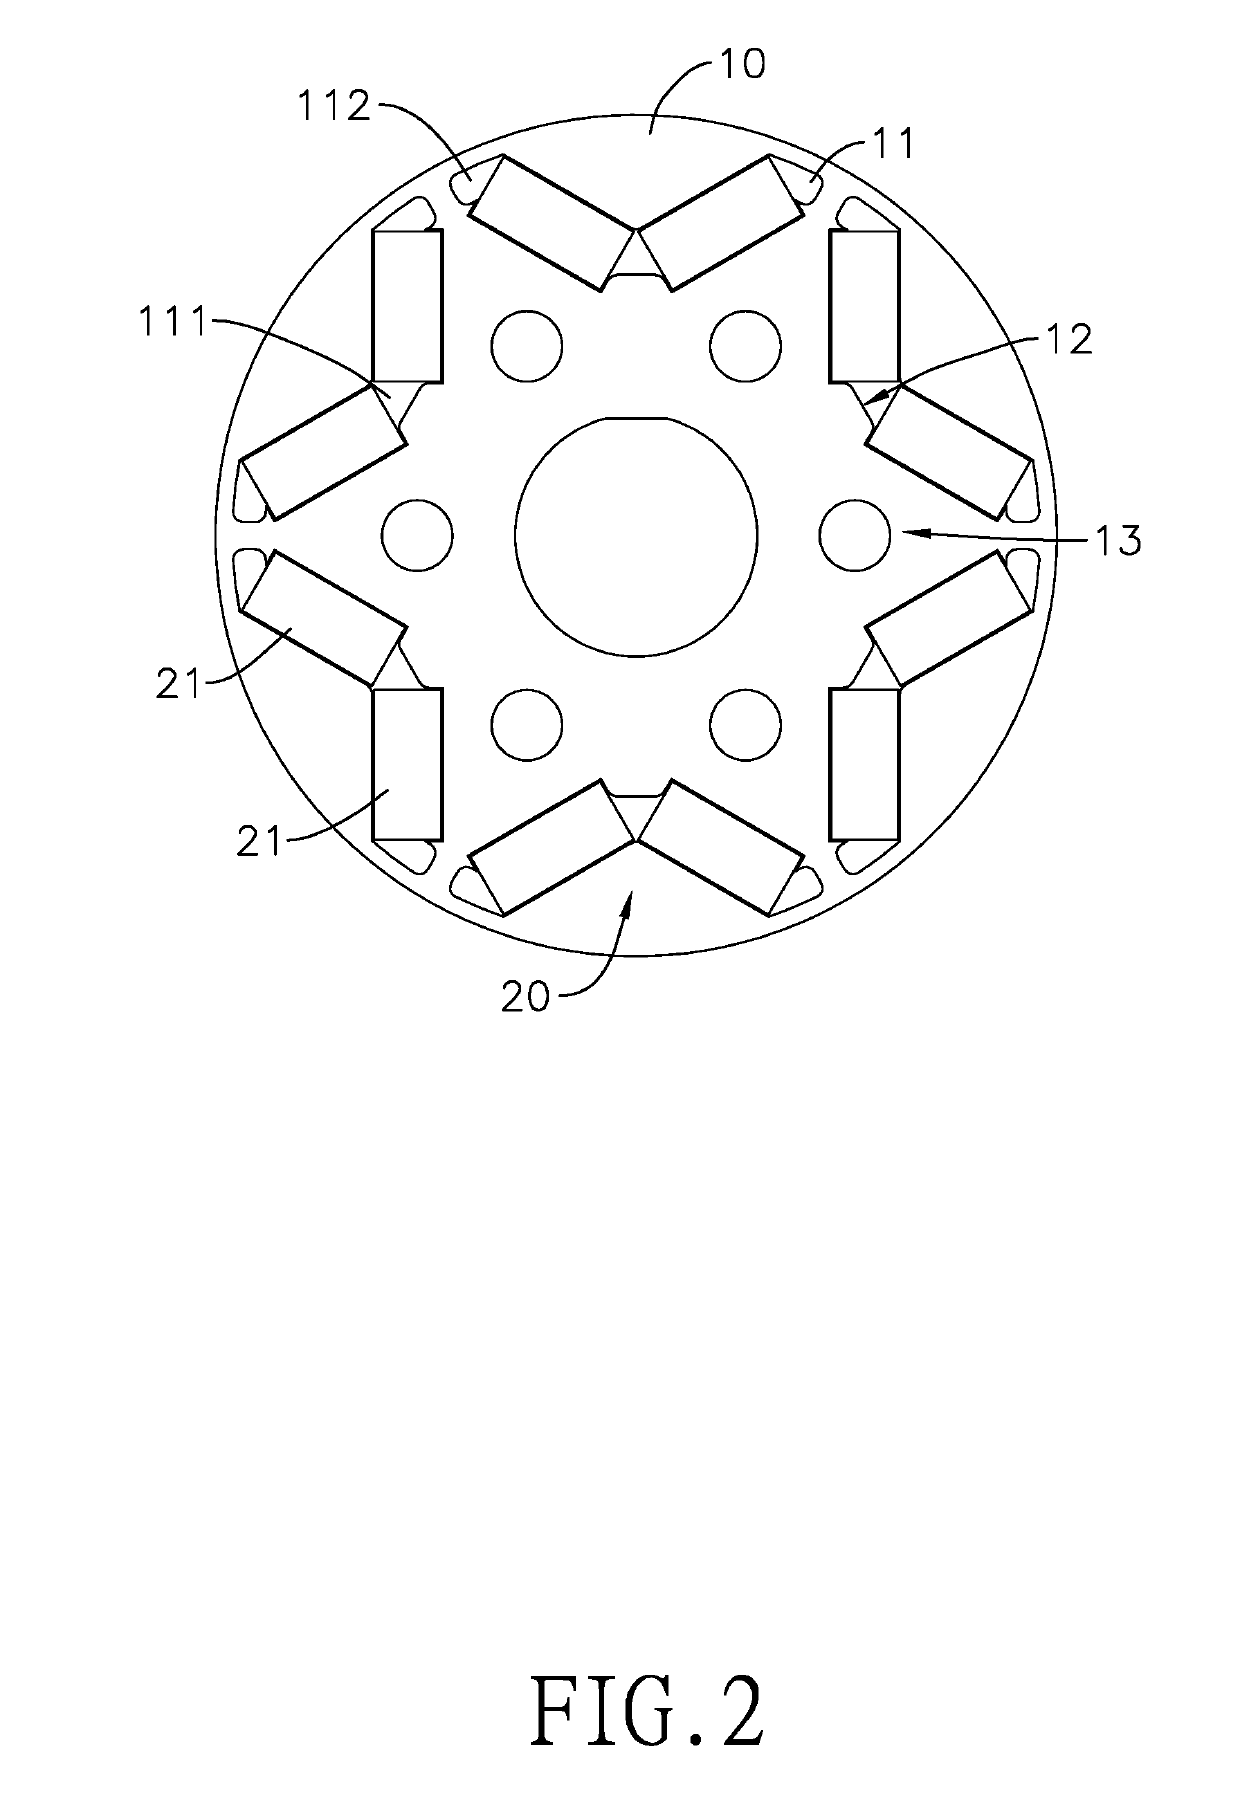 Motor rotor with holes